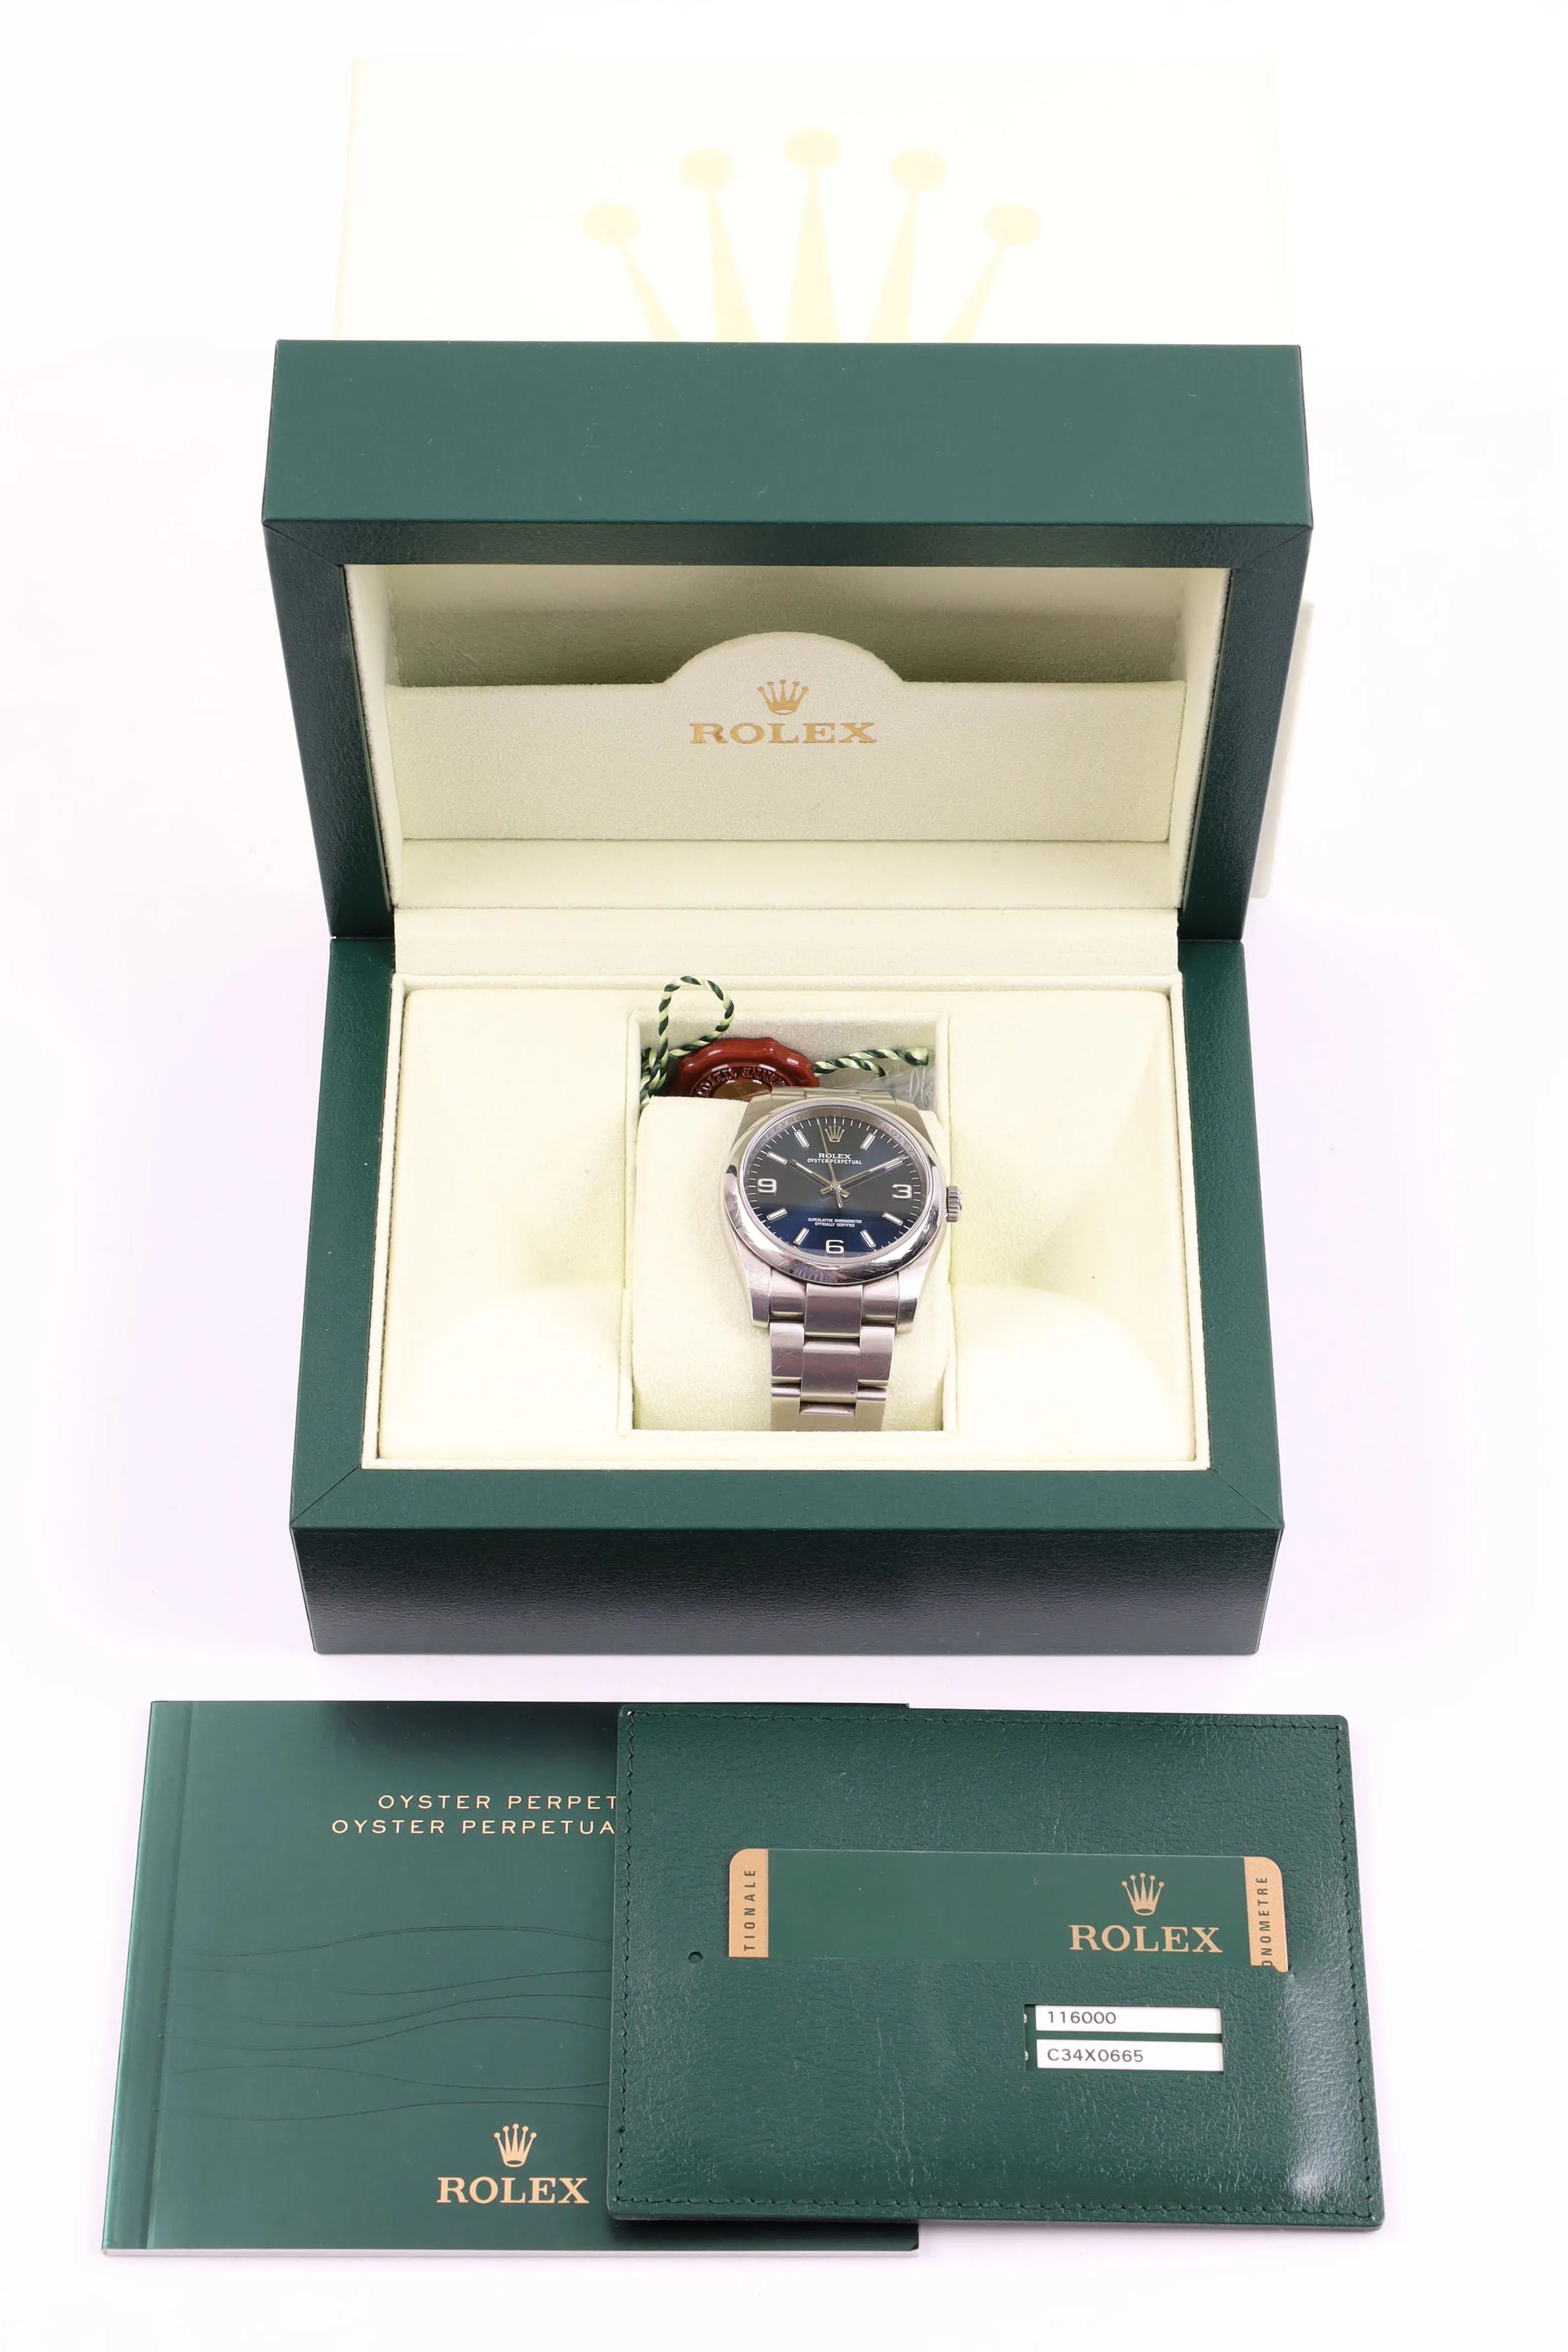 Rolex Oyster Perpetual 11600 36mm Stainless steel Blue 4